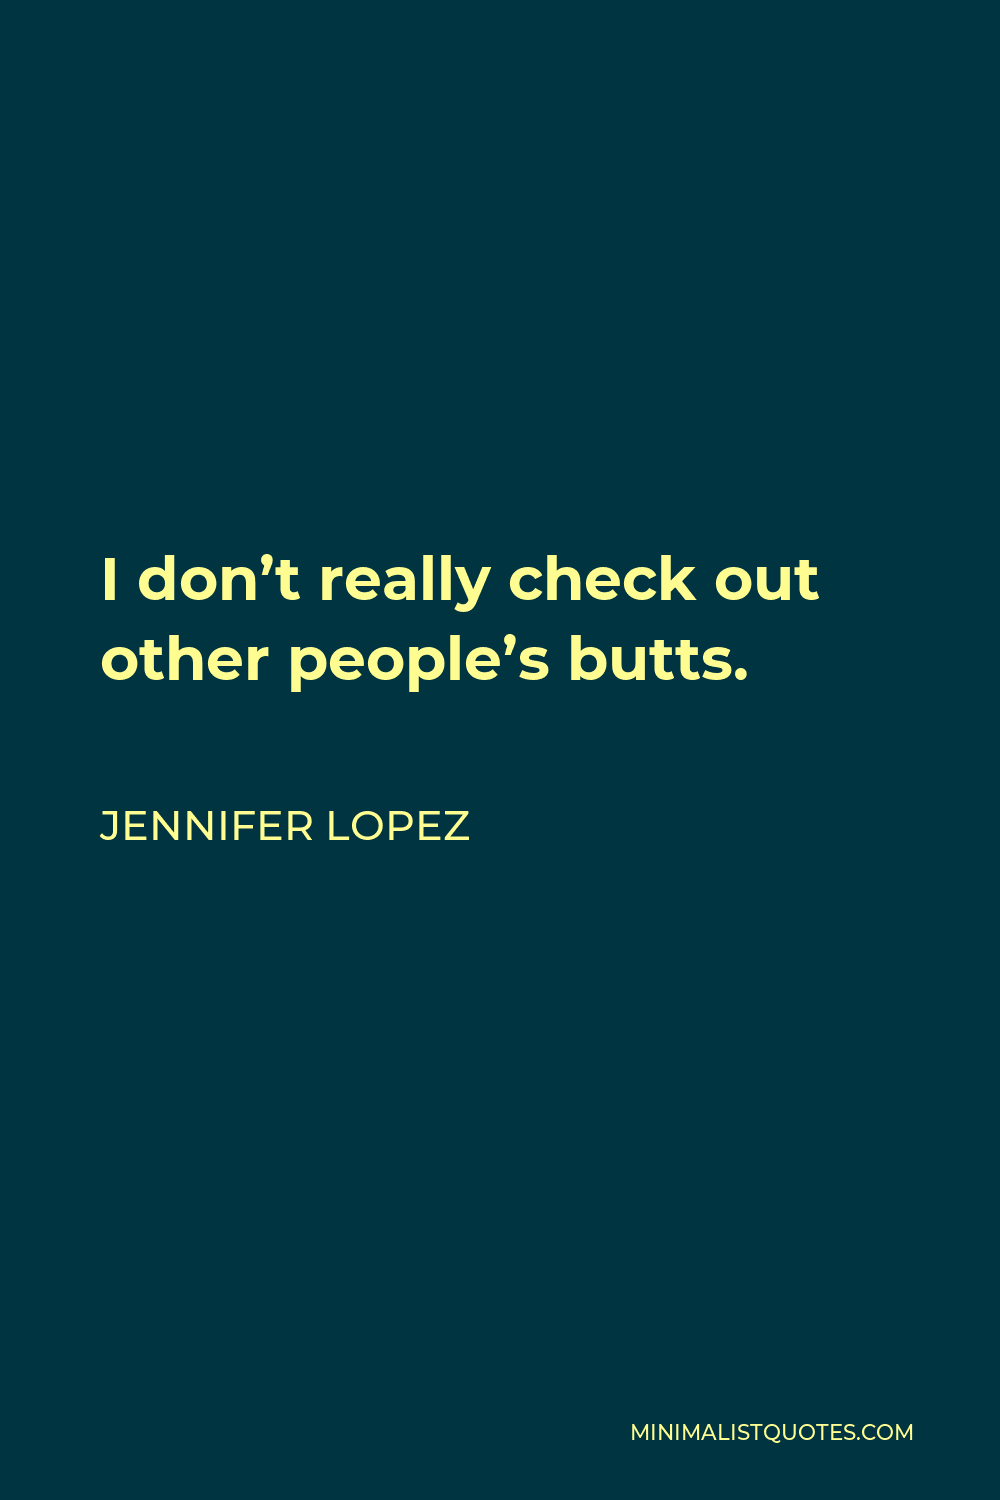 Jennifer Lopez Quote - I don’t really check out other people’s butts.